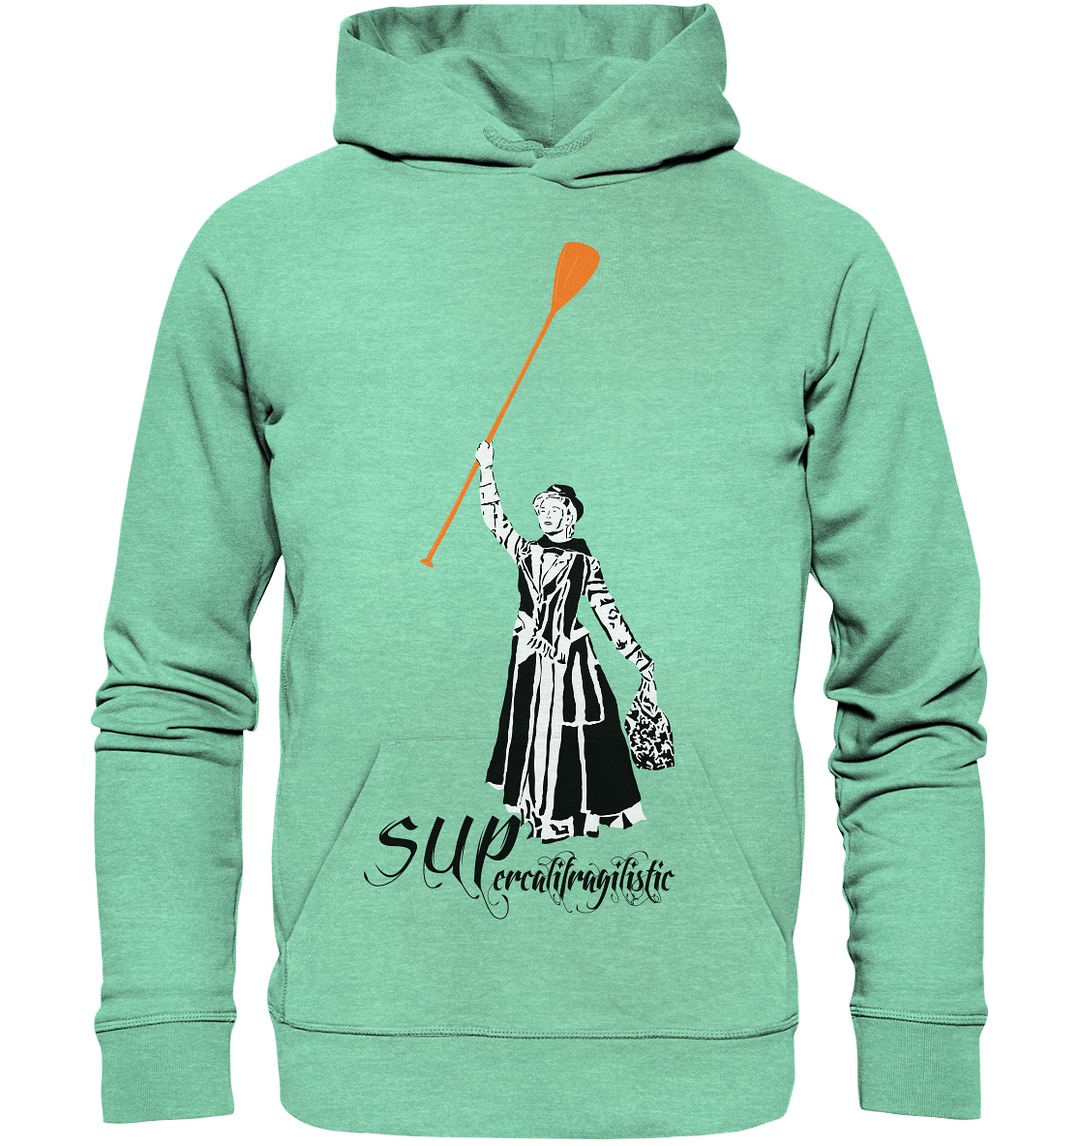 SUPlebrity is SUP Fashion, Stand Up Paddling Wear for Boys and Girls, 